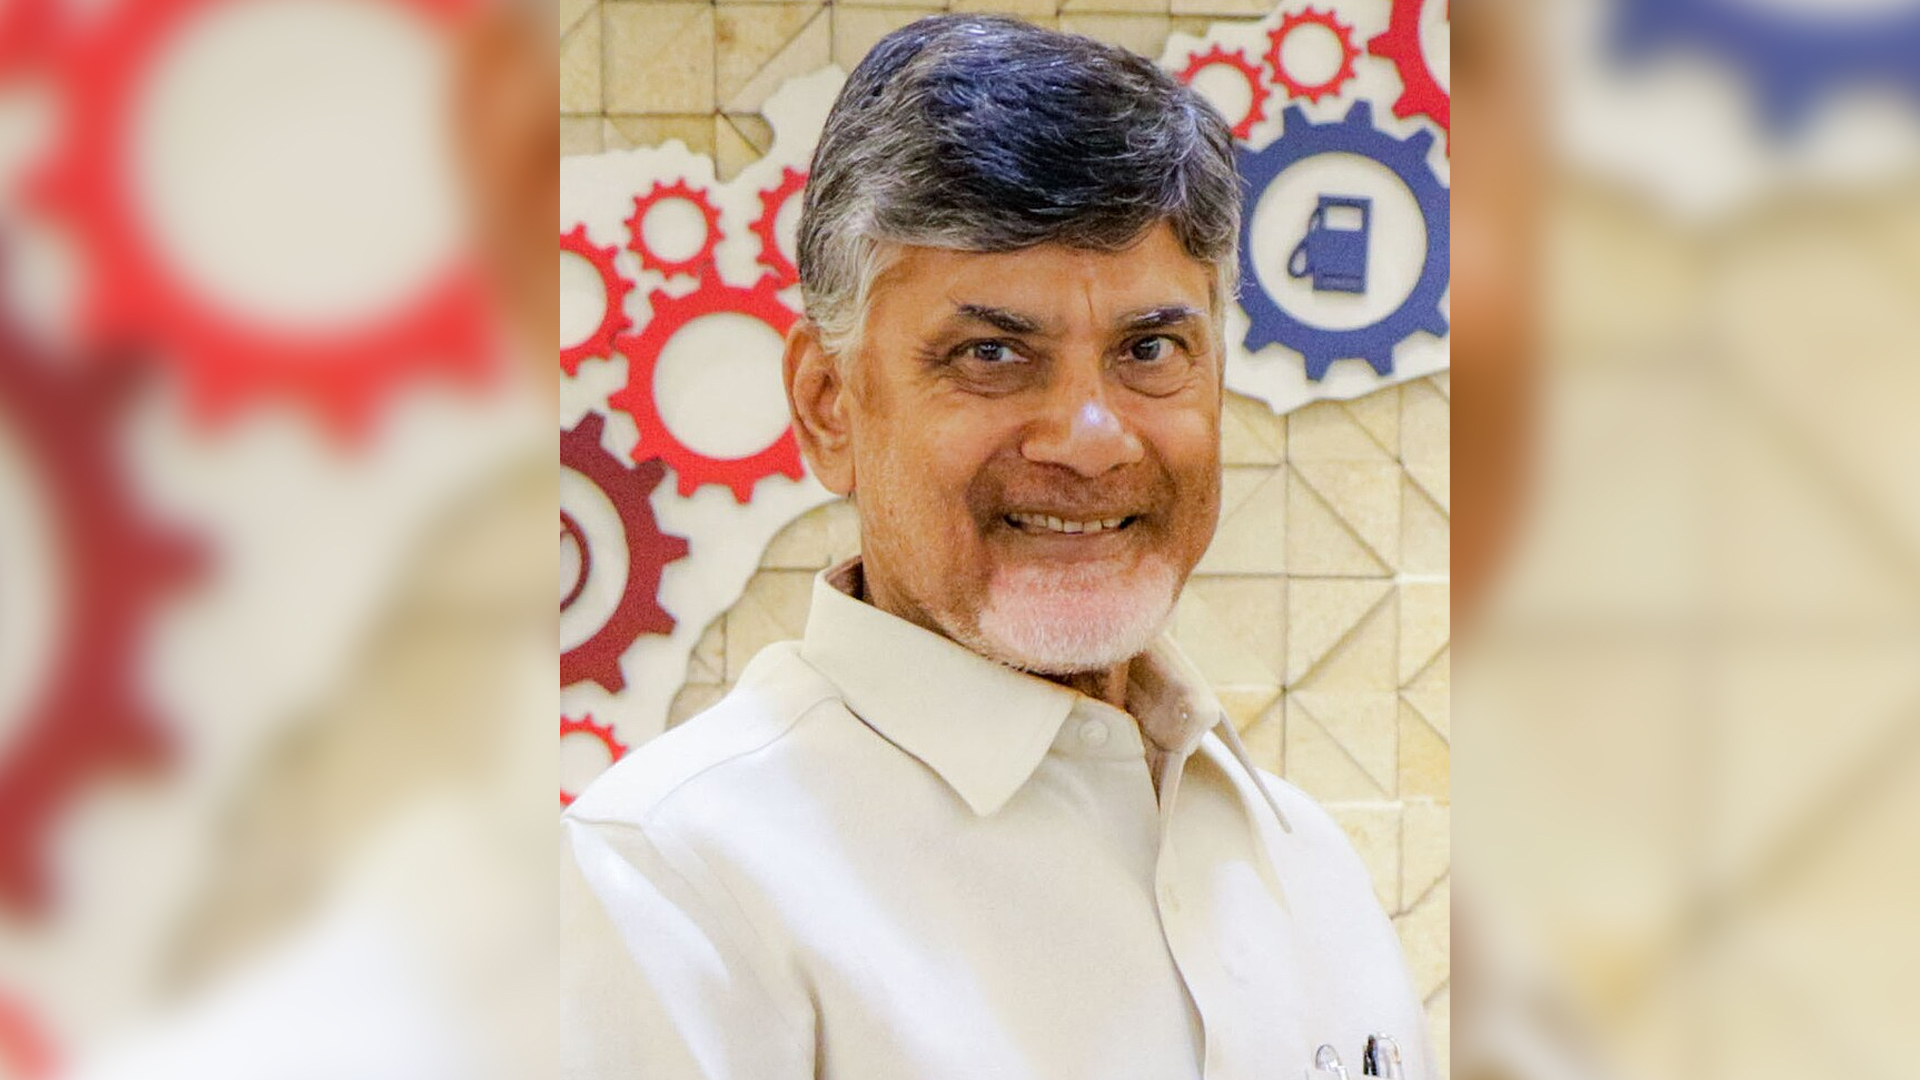 Former CM Chandrababu Naidu calls for united effort to defeat Jagan Mohan Reddy in upcoming elections